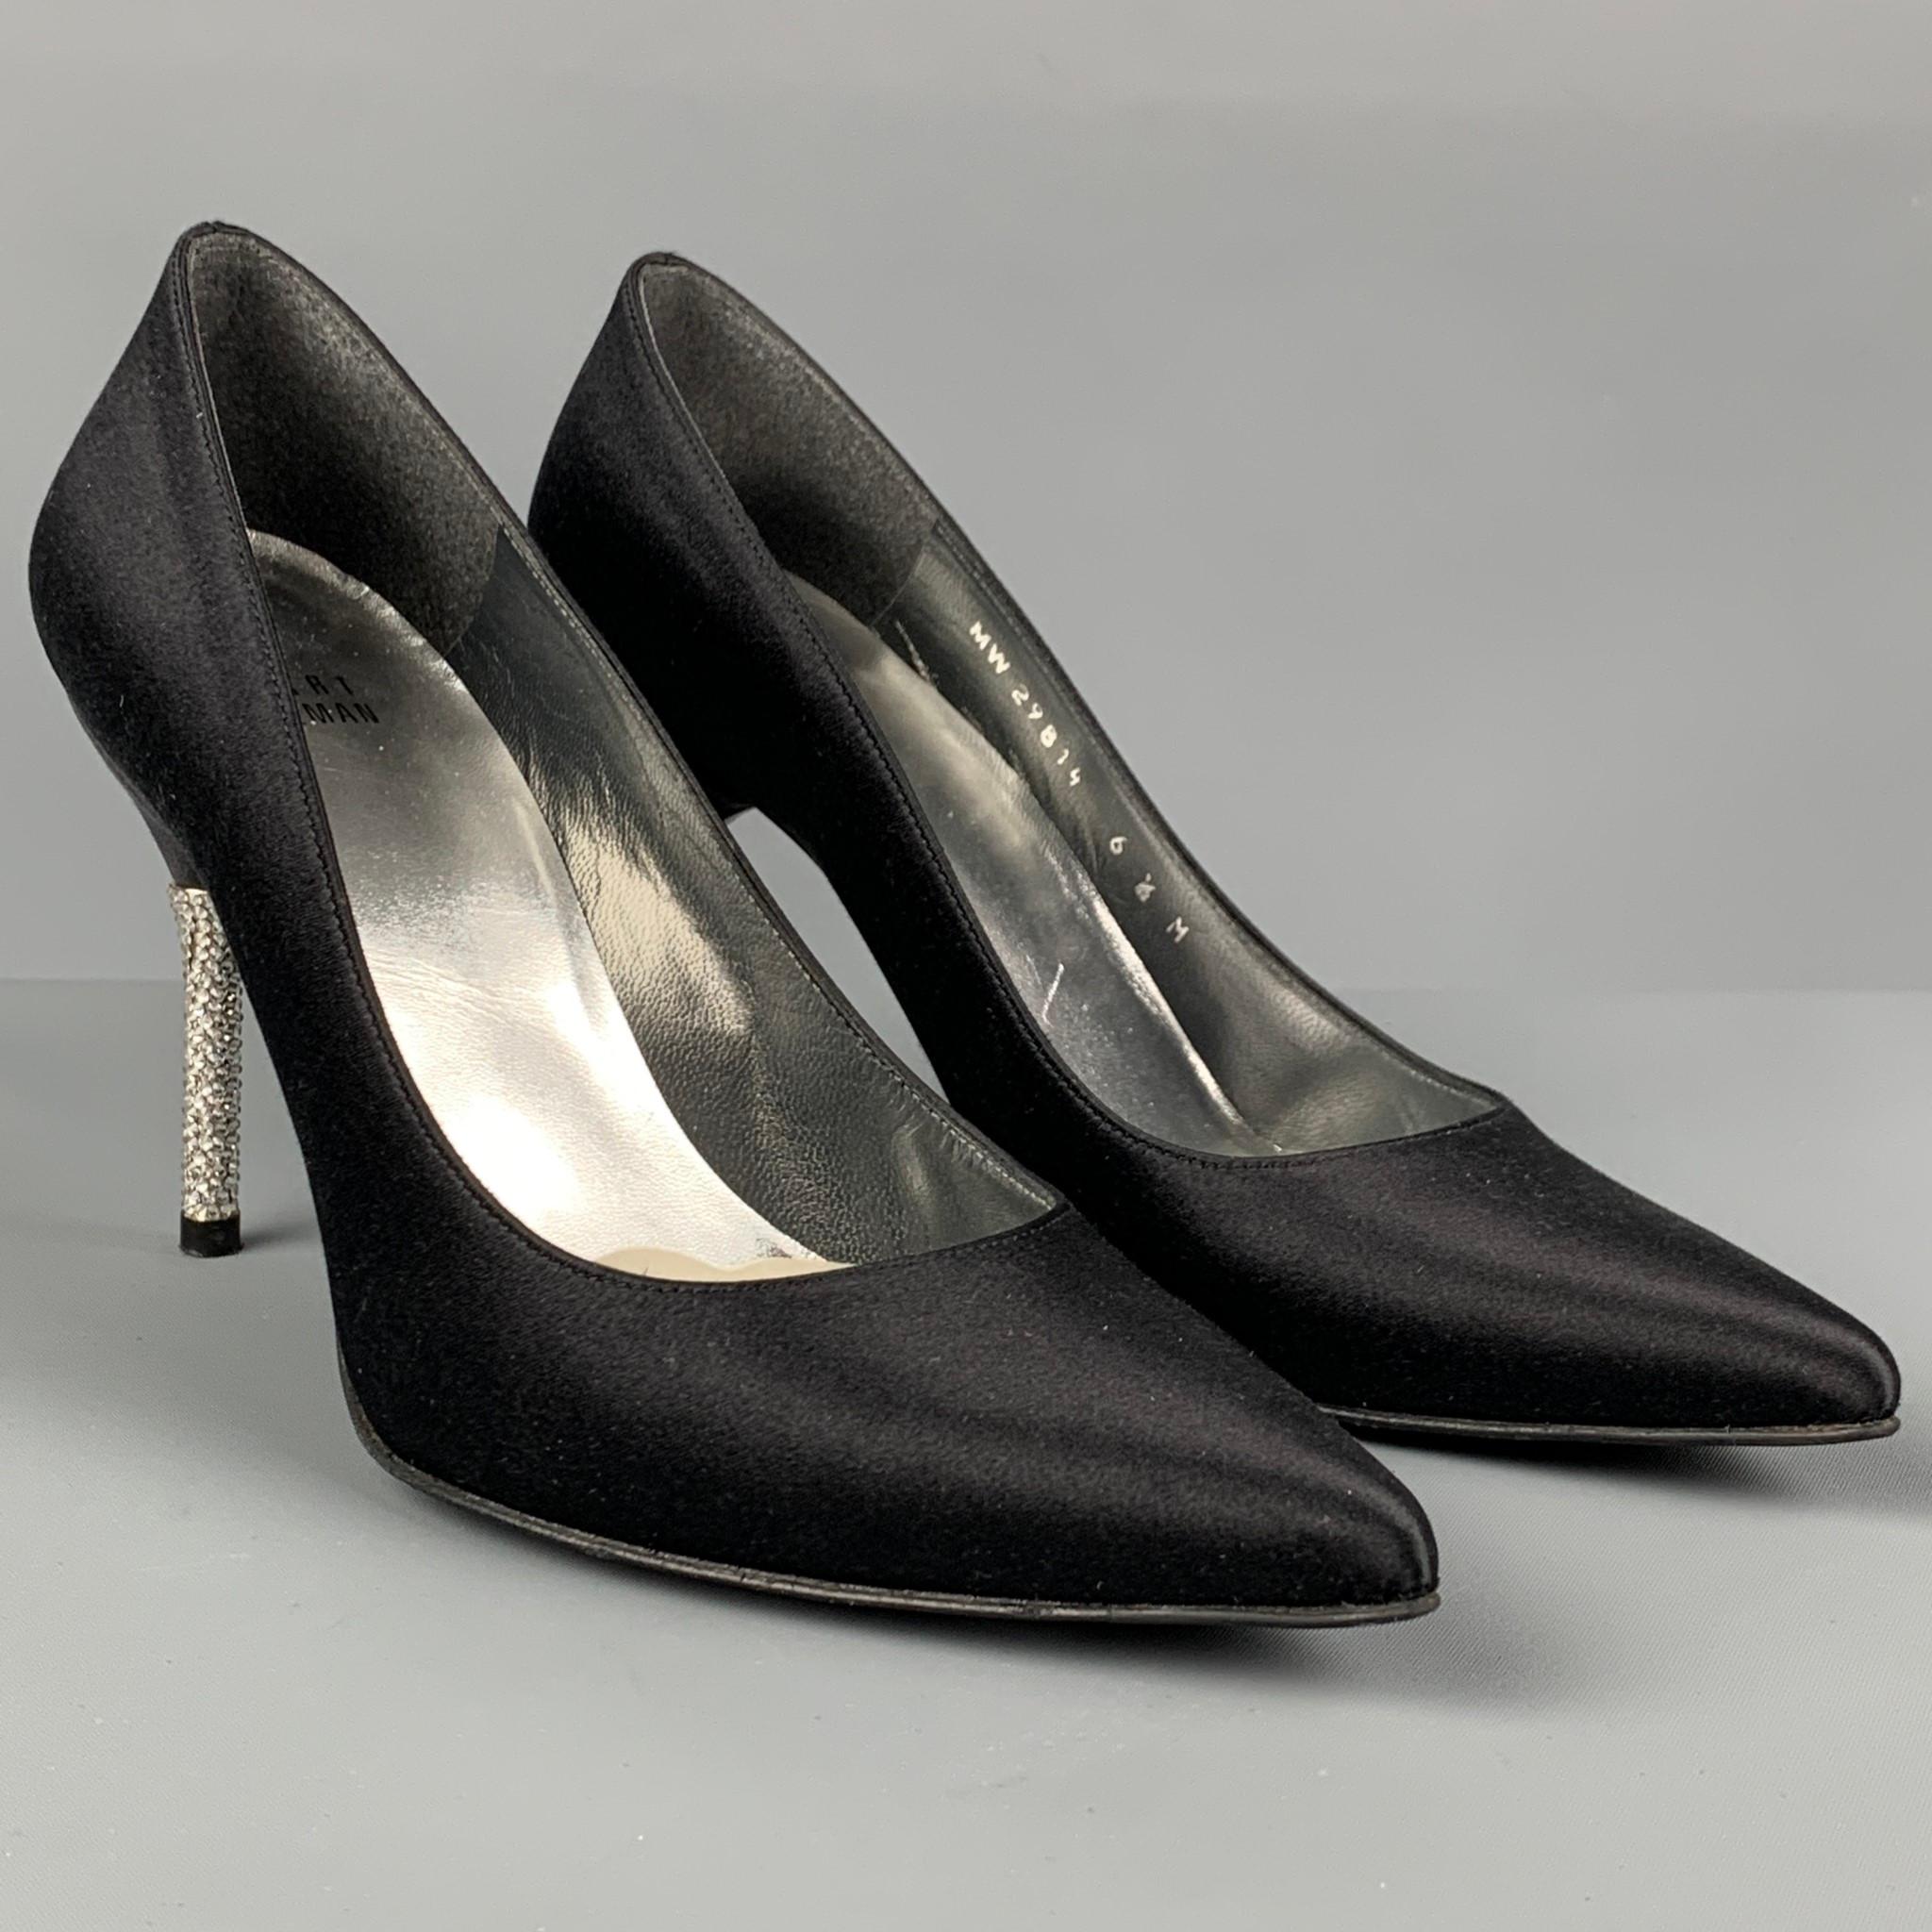 STUART WEITZMAN pumps comes in a black & silver silk featuring a rhinestone heel and a pointed toe. Made in Spain. 

Very Good Pre-Owned Condition.
Marked: MW 29814 6.5M

Measurements:

Heel: 3 in. 